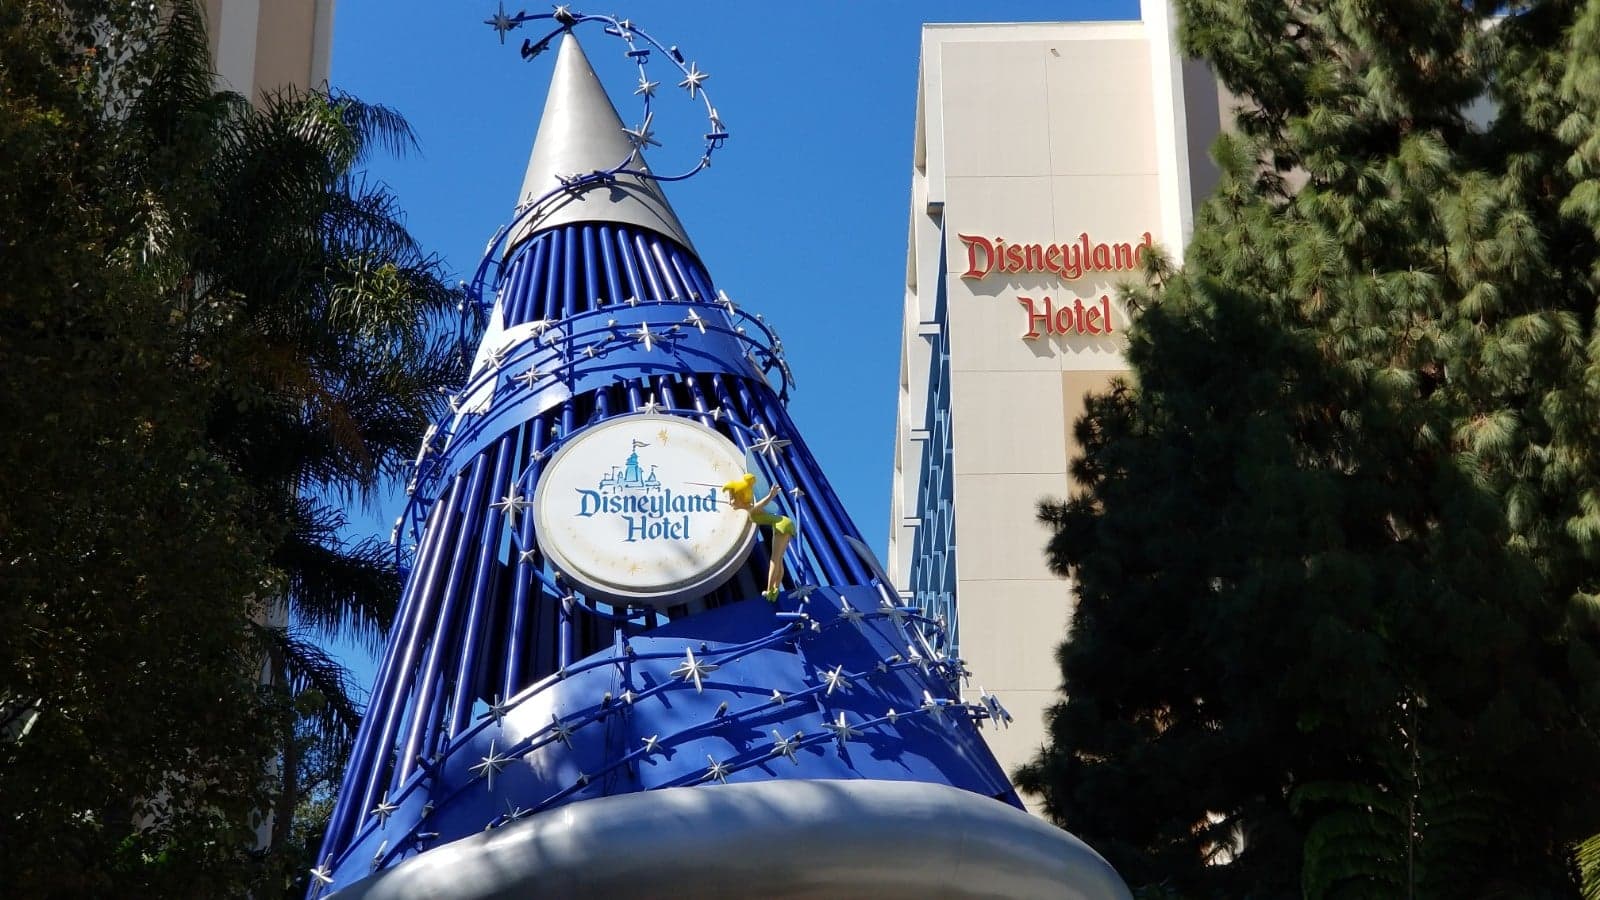 Discounts on Select Disneyland Resort Rooms Announced for This July Through September